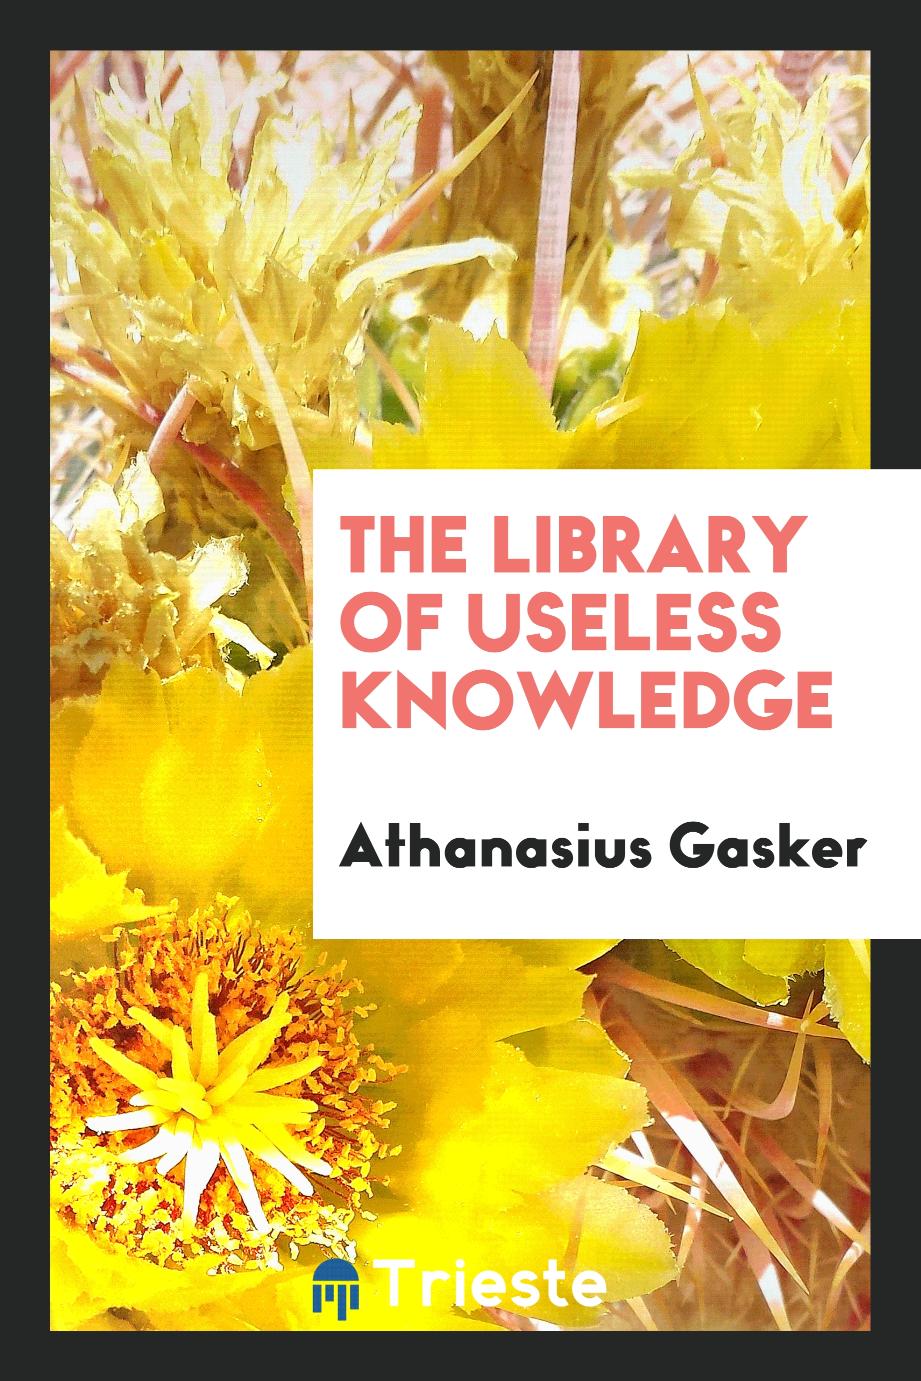 The library of useless knowledge